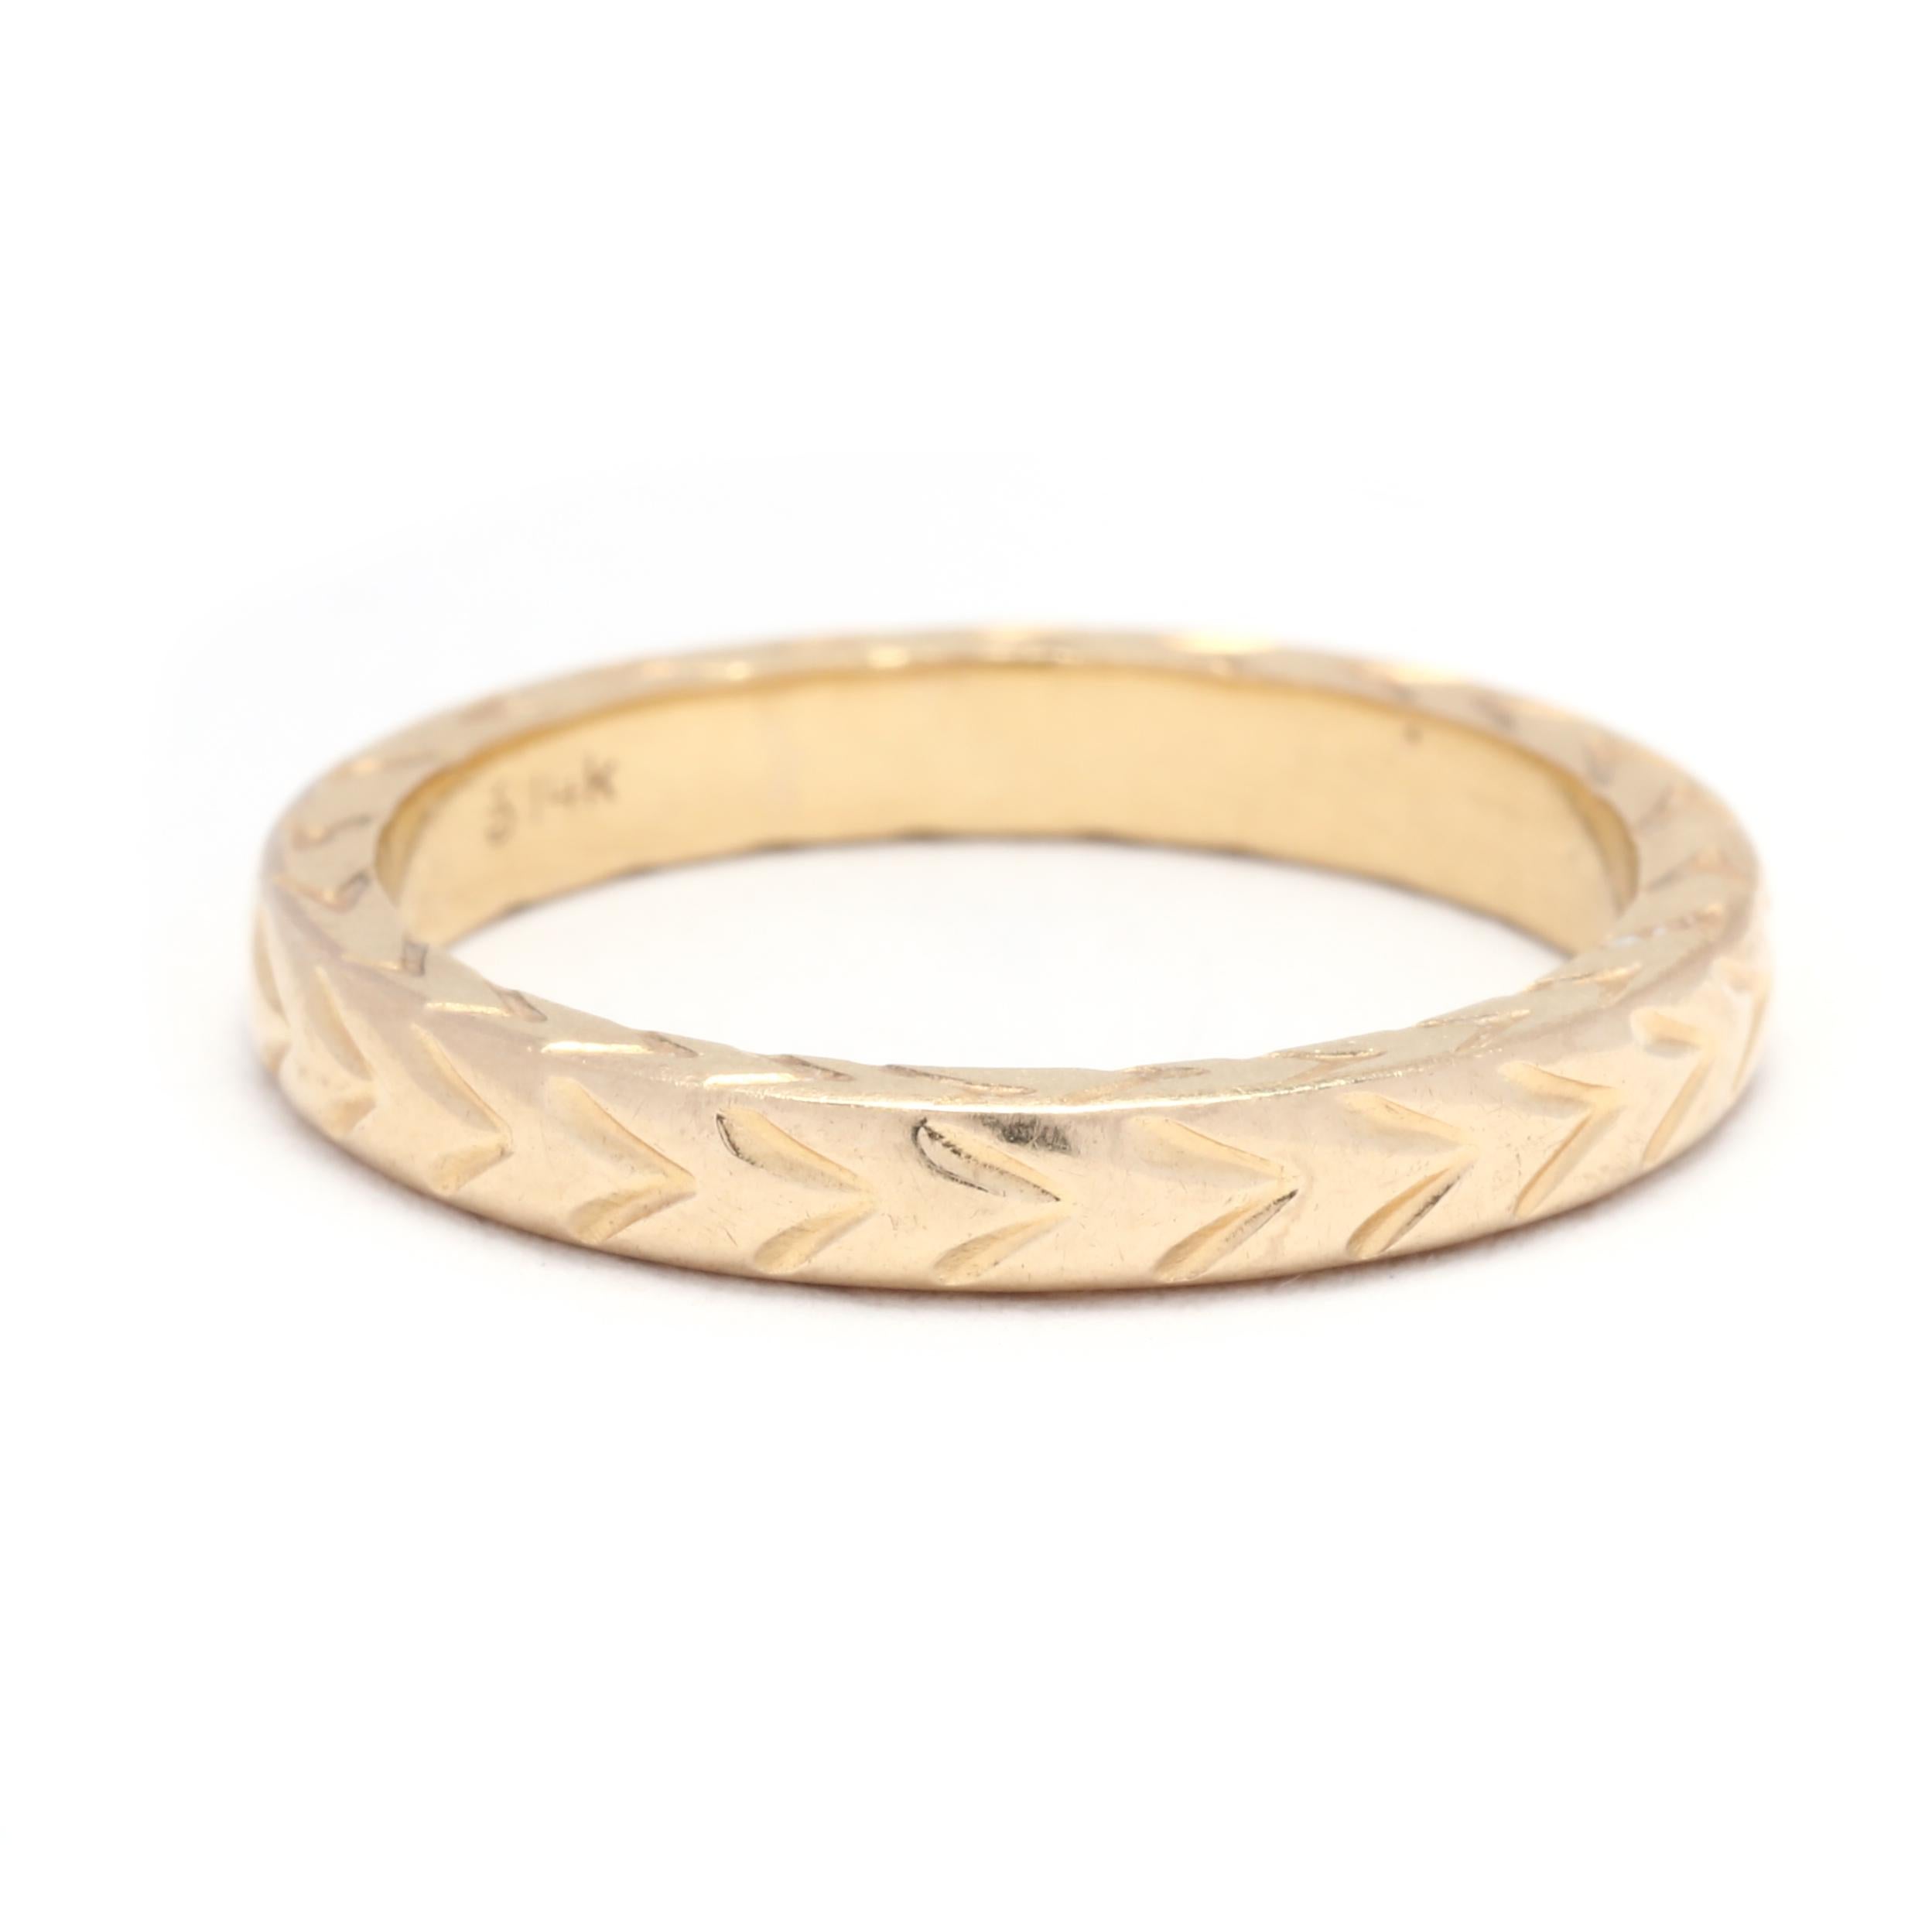 This stunning thick engraved stackable band is the perfect accessory for adding a touch of elegance and style to your look. Crafted in 14K yellow gold, the band features a unique engraved design that adds texture and depth. The ring is a size 5.75,